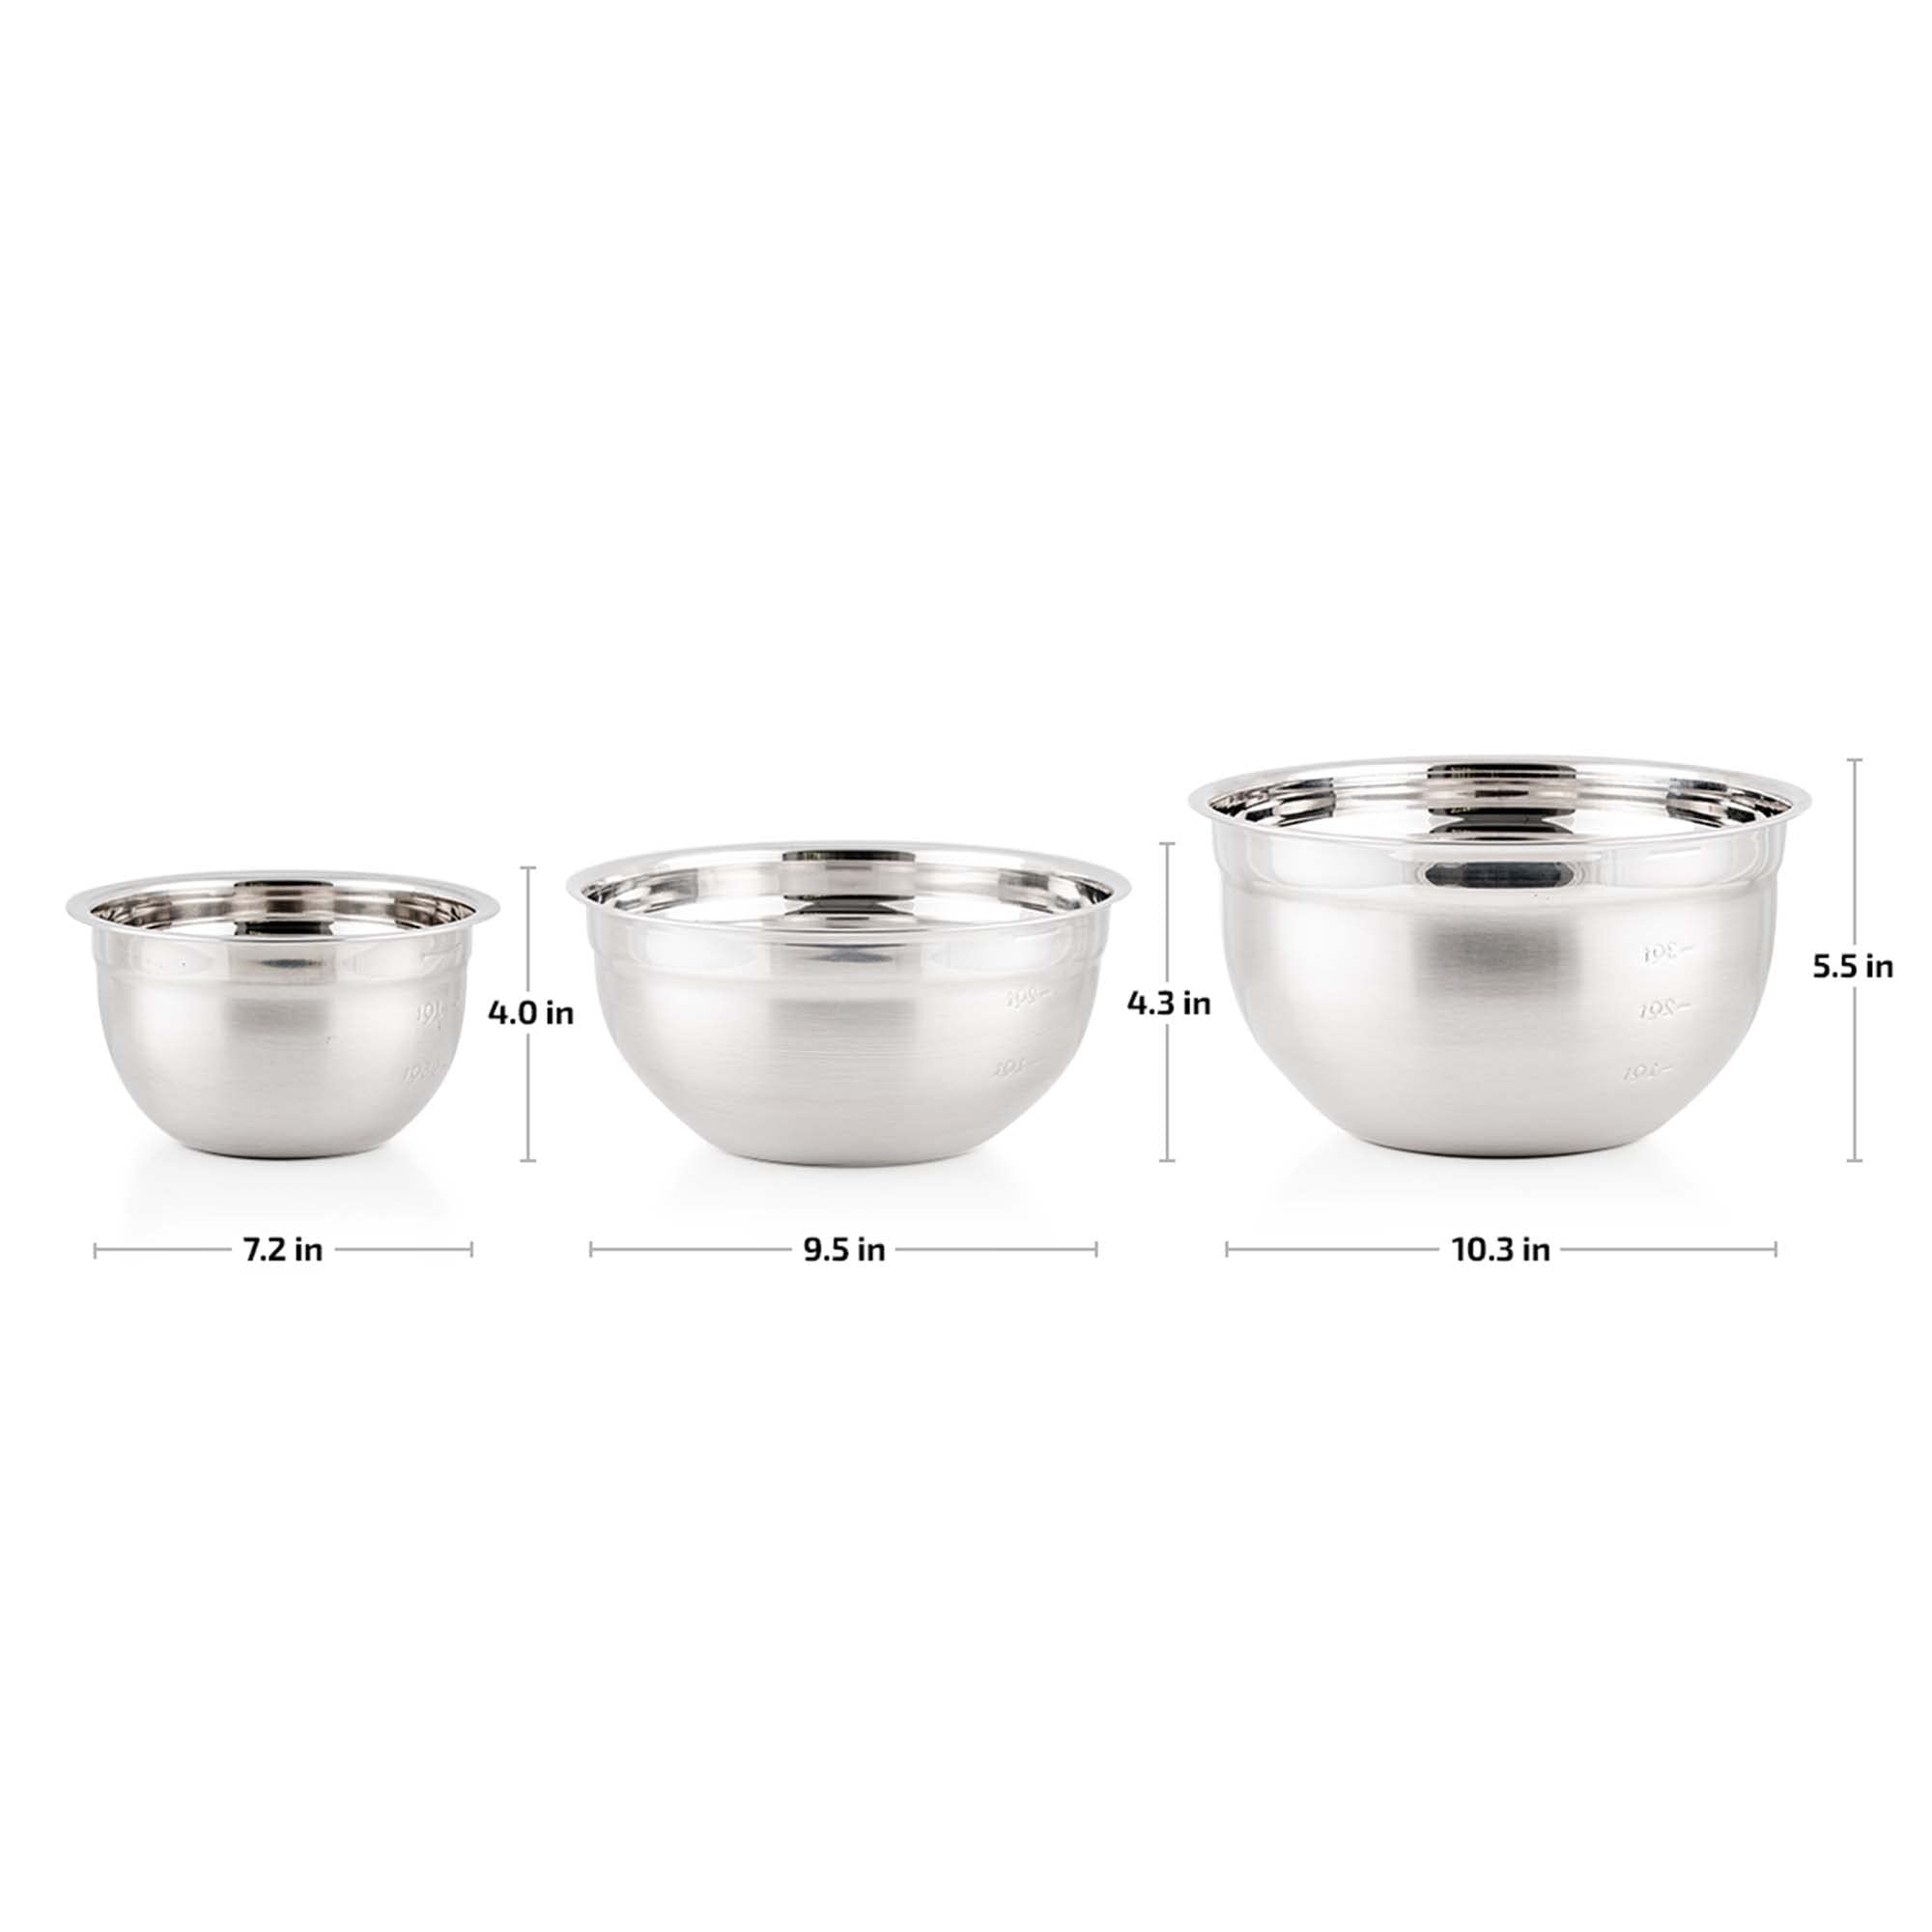 OVENTE Mixing Bowl Stainless Steel with Lids, Nesting Bowls with Measuring Marks, Safe Easy to Clean & Storage, Perfect for Cooking Baking Serving, Silver BM46333S, 1.5, 3.5, and 5 Quarts, Set of 3